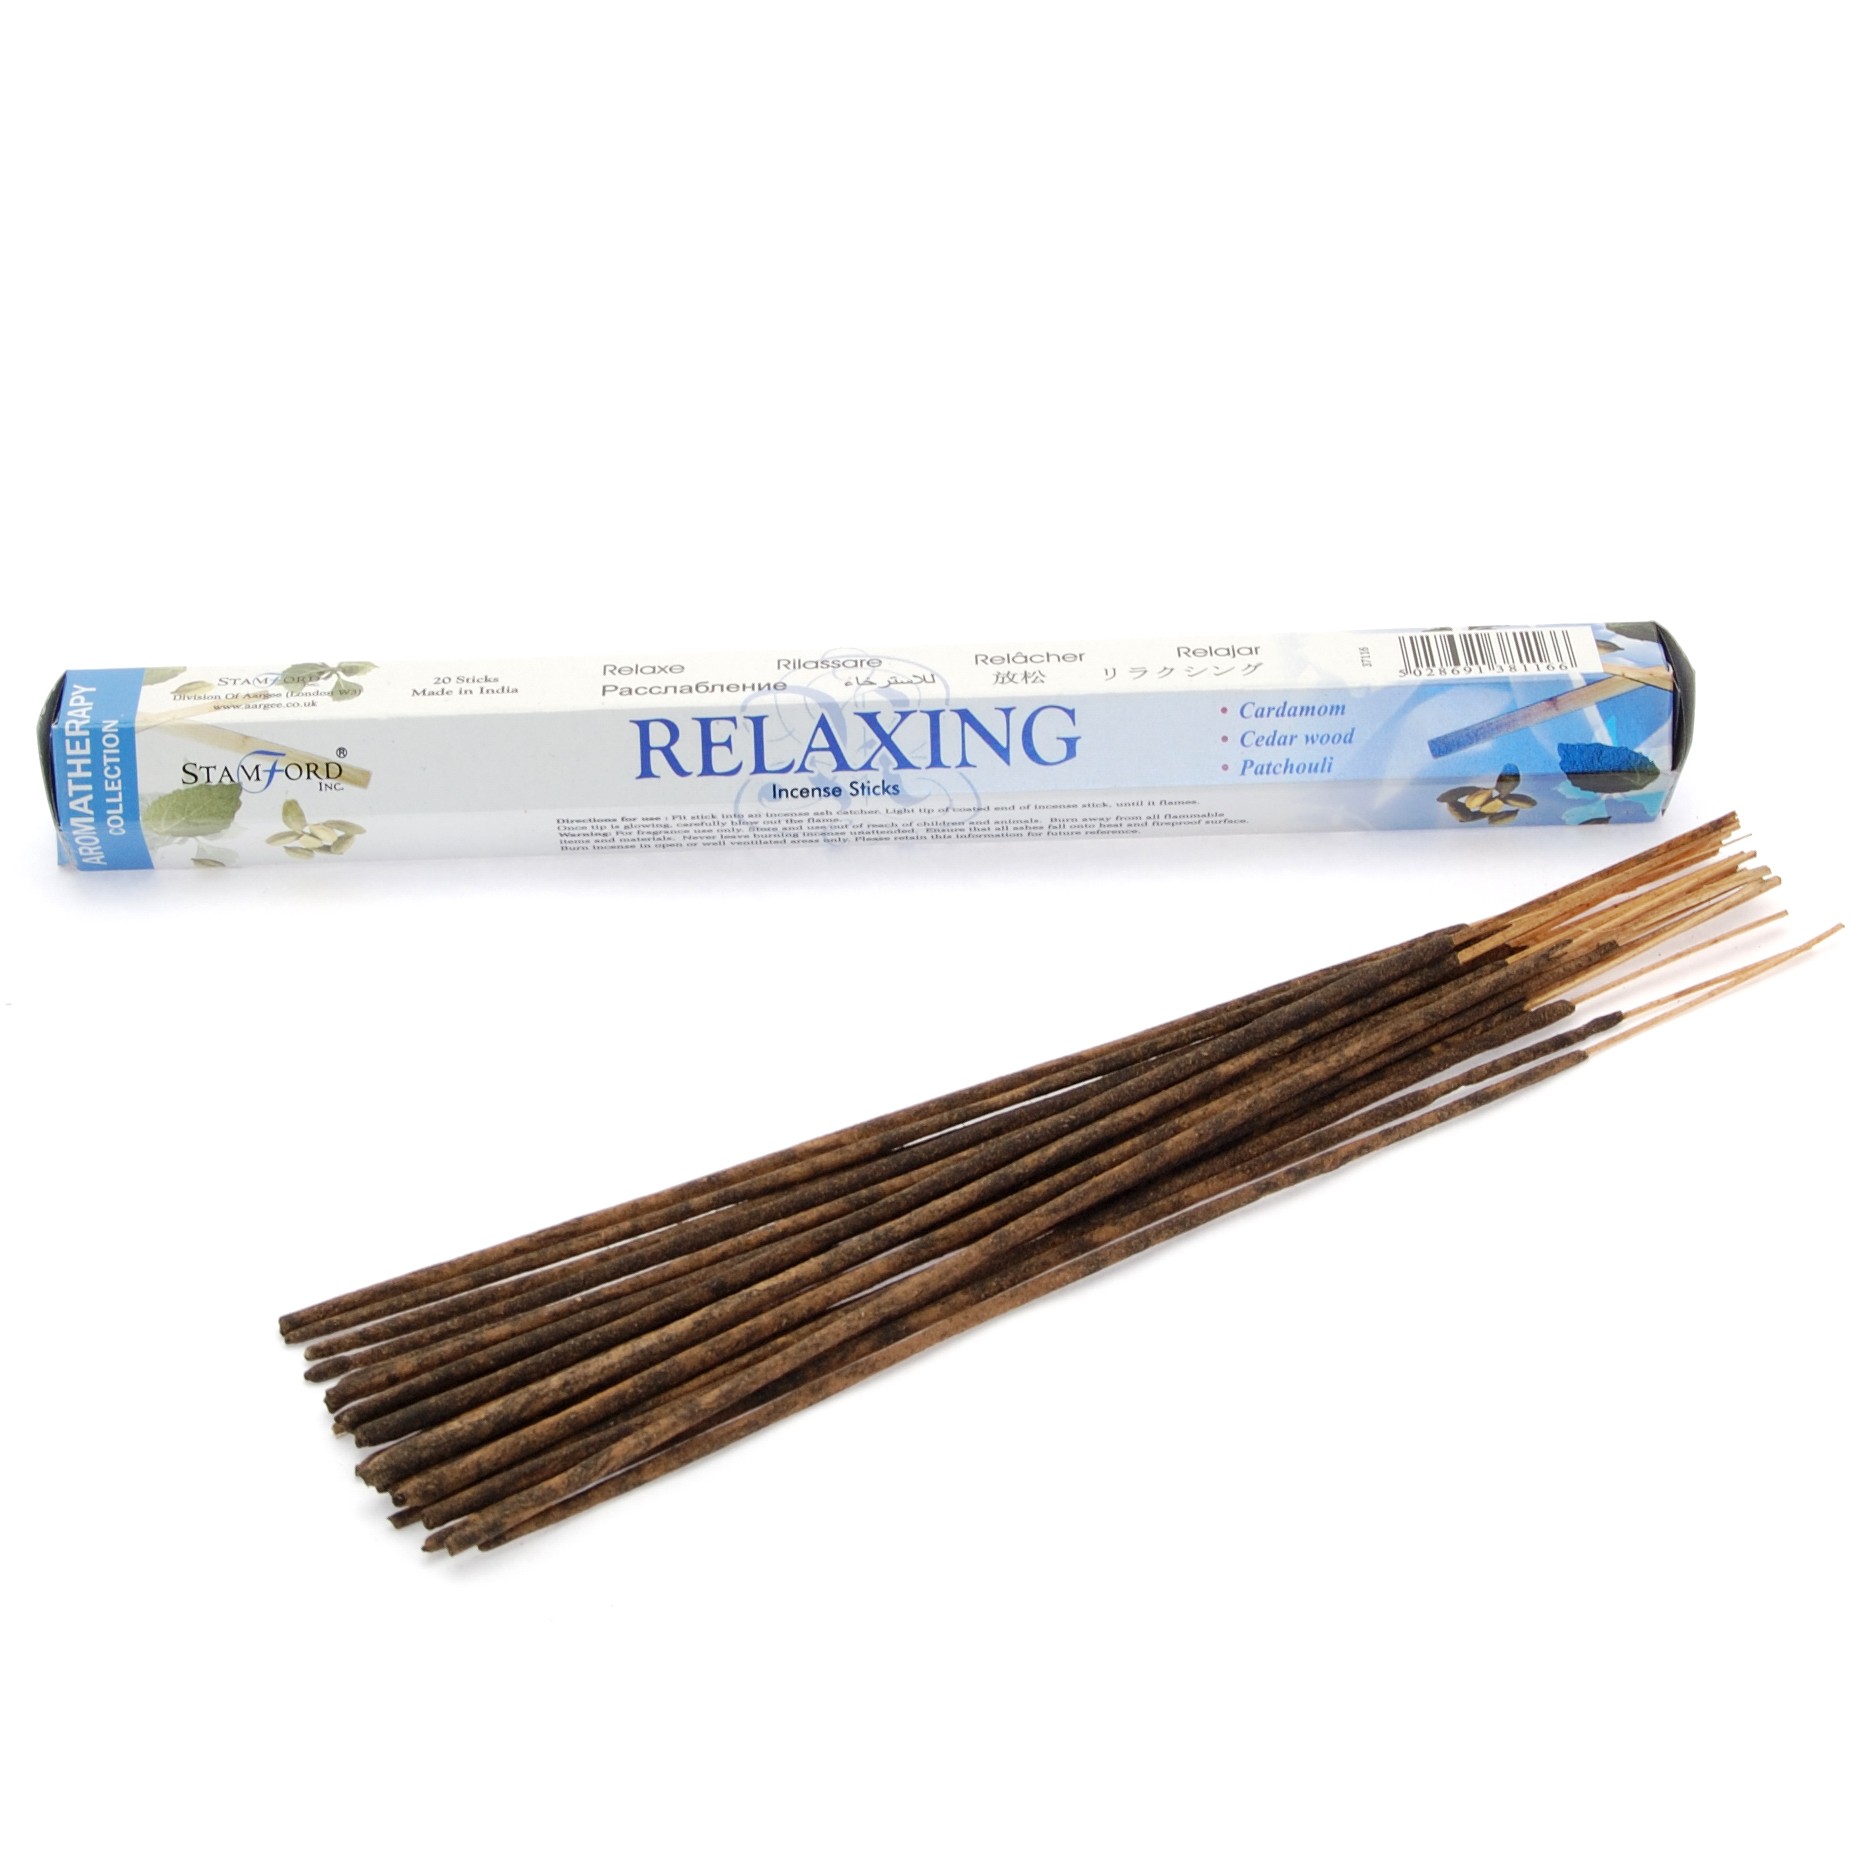 10 x Packs Stamford Premium Incense - Relaxing - Click Image to Close